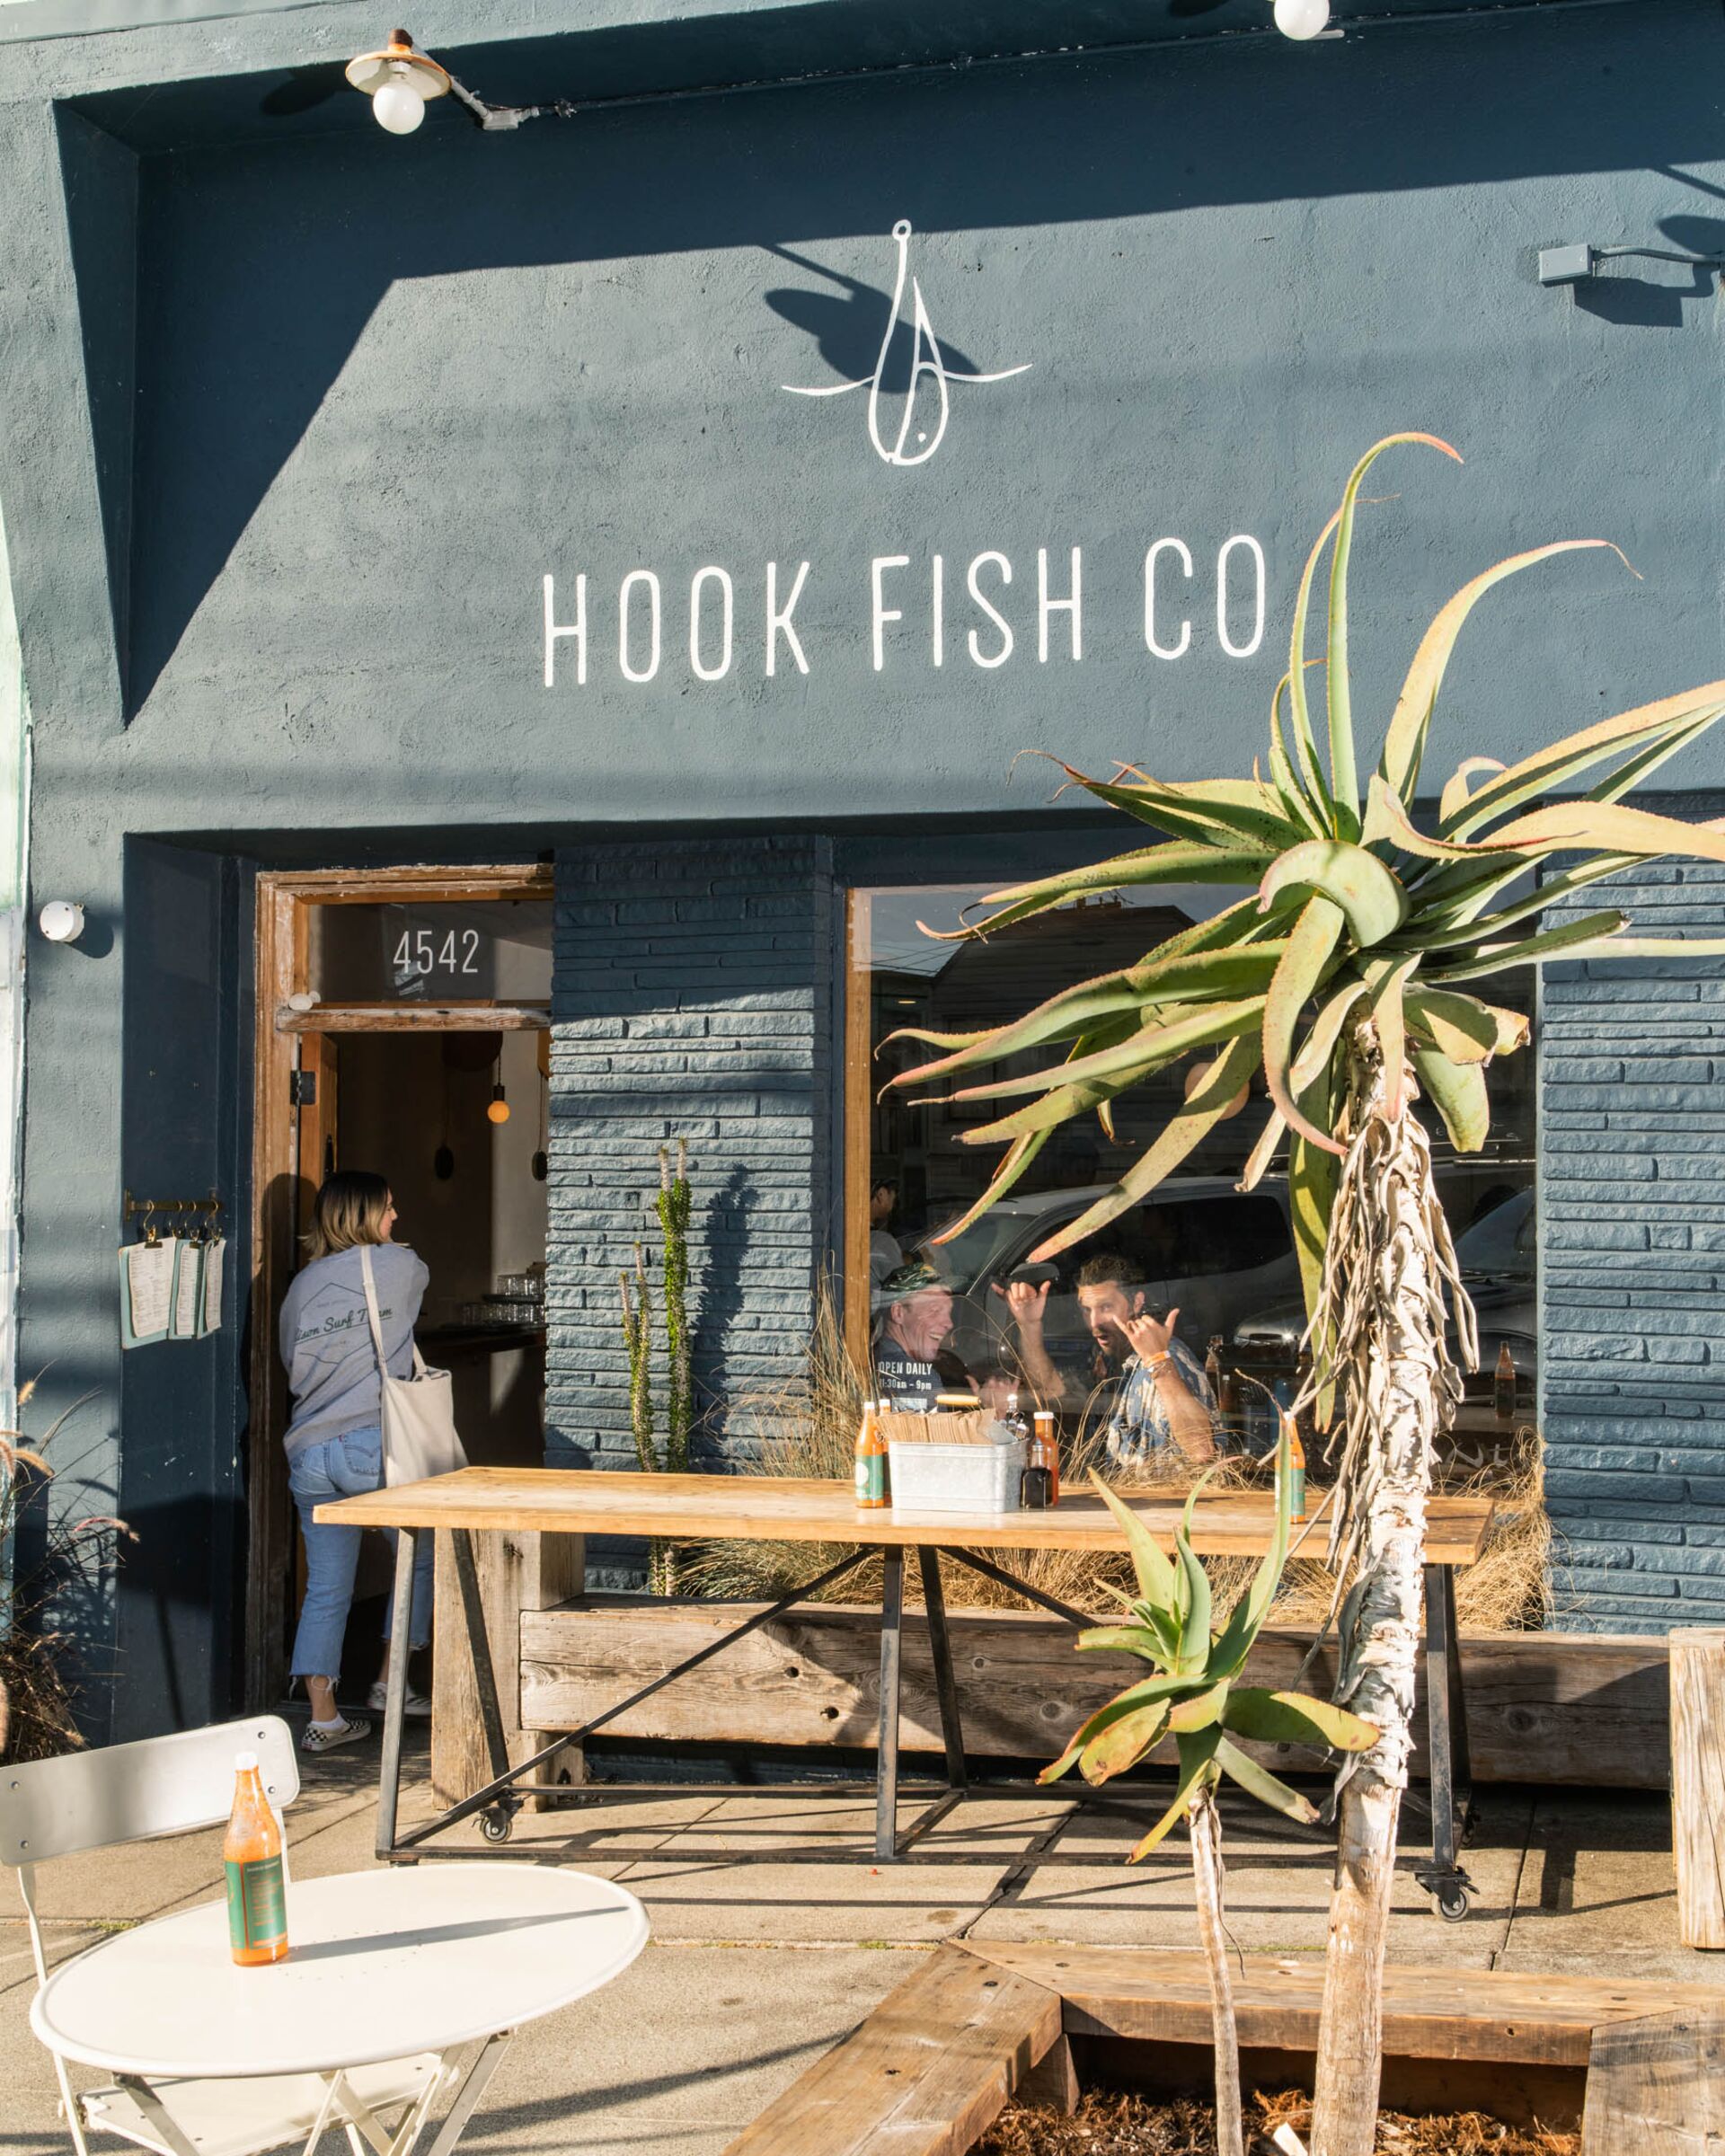 The 15 Best Seafood Restaurants in San Francisco